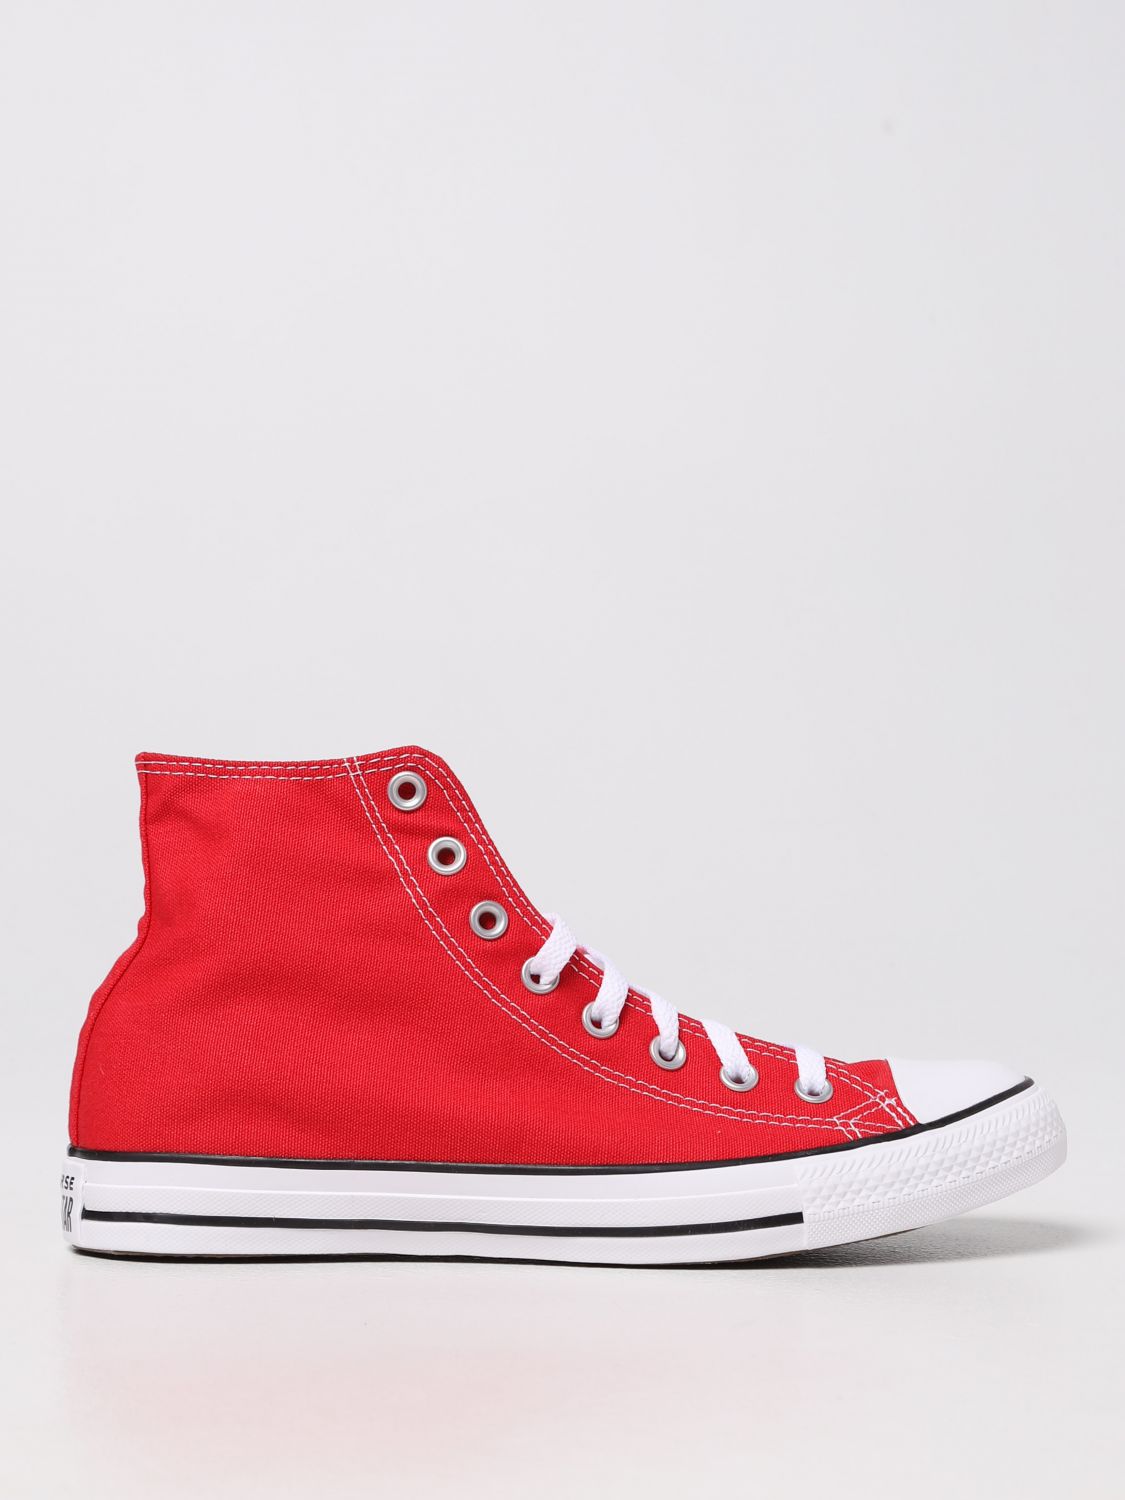 Sneakers high-top Chuck Taylor Converse in tela عصير ليمون ونعناع